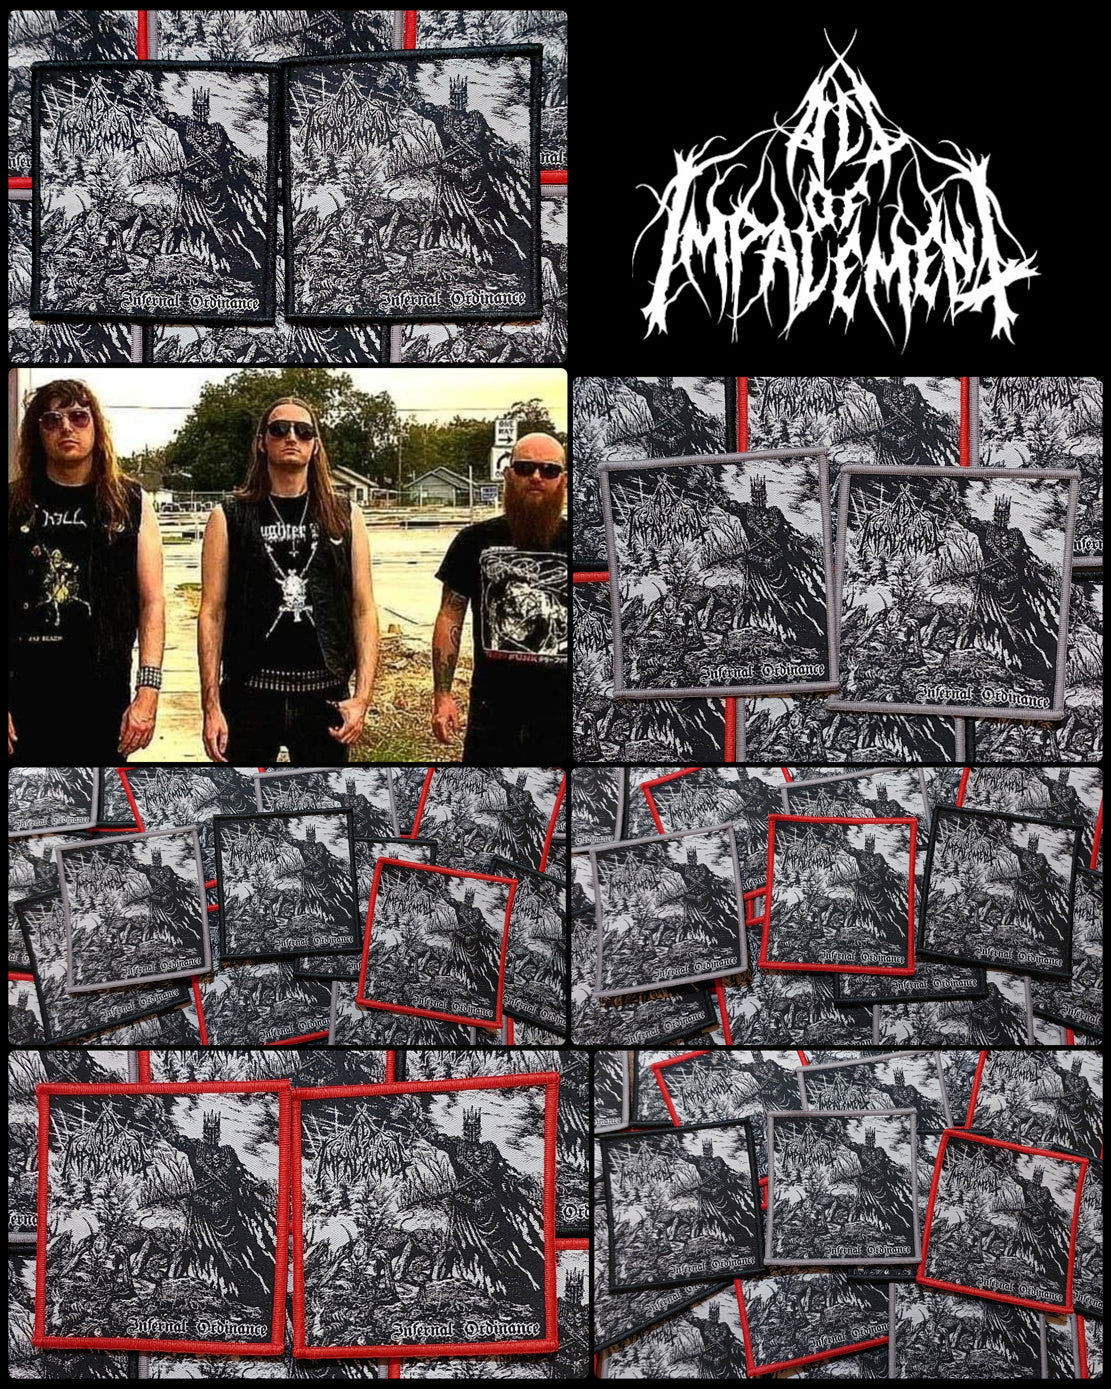 ACT OF IMPALEMENT (US) - Infernal Ordinance